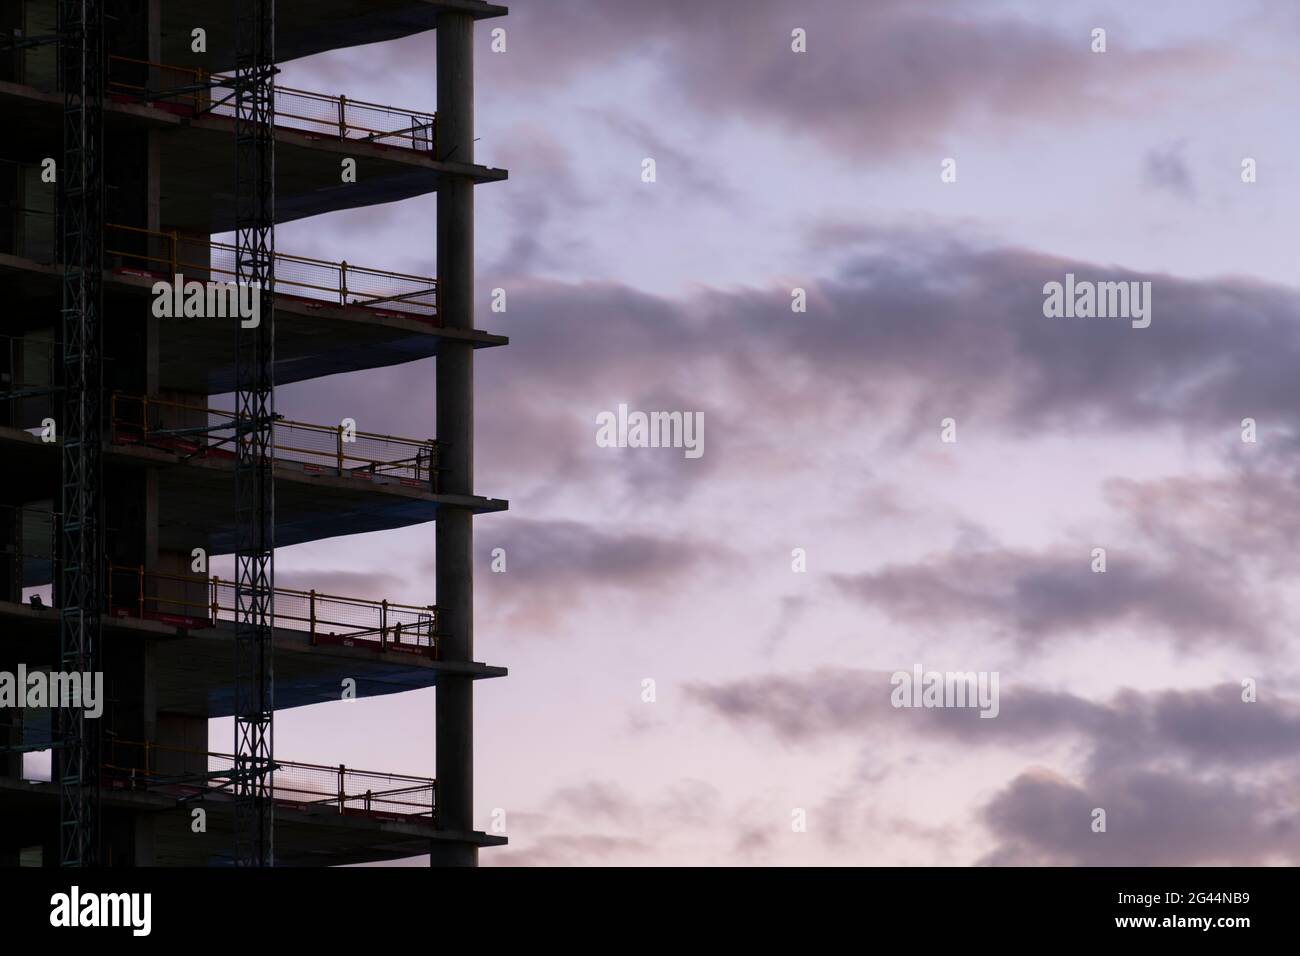 High rise building under construction. Stock Photo